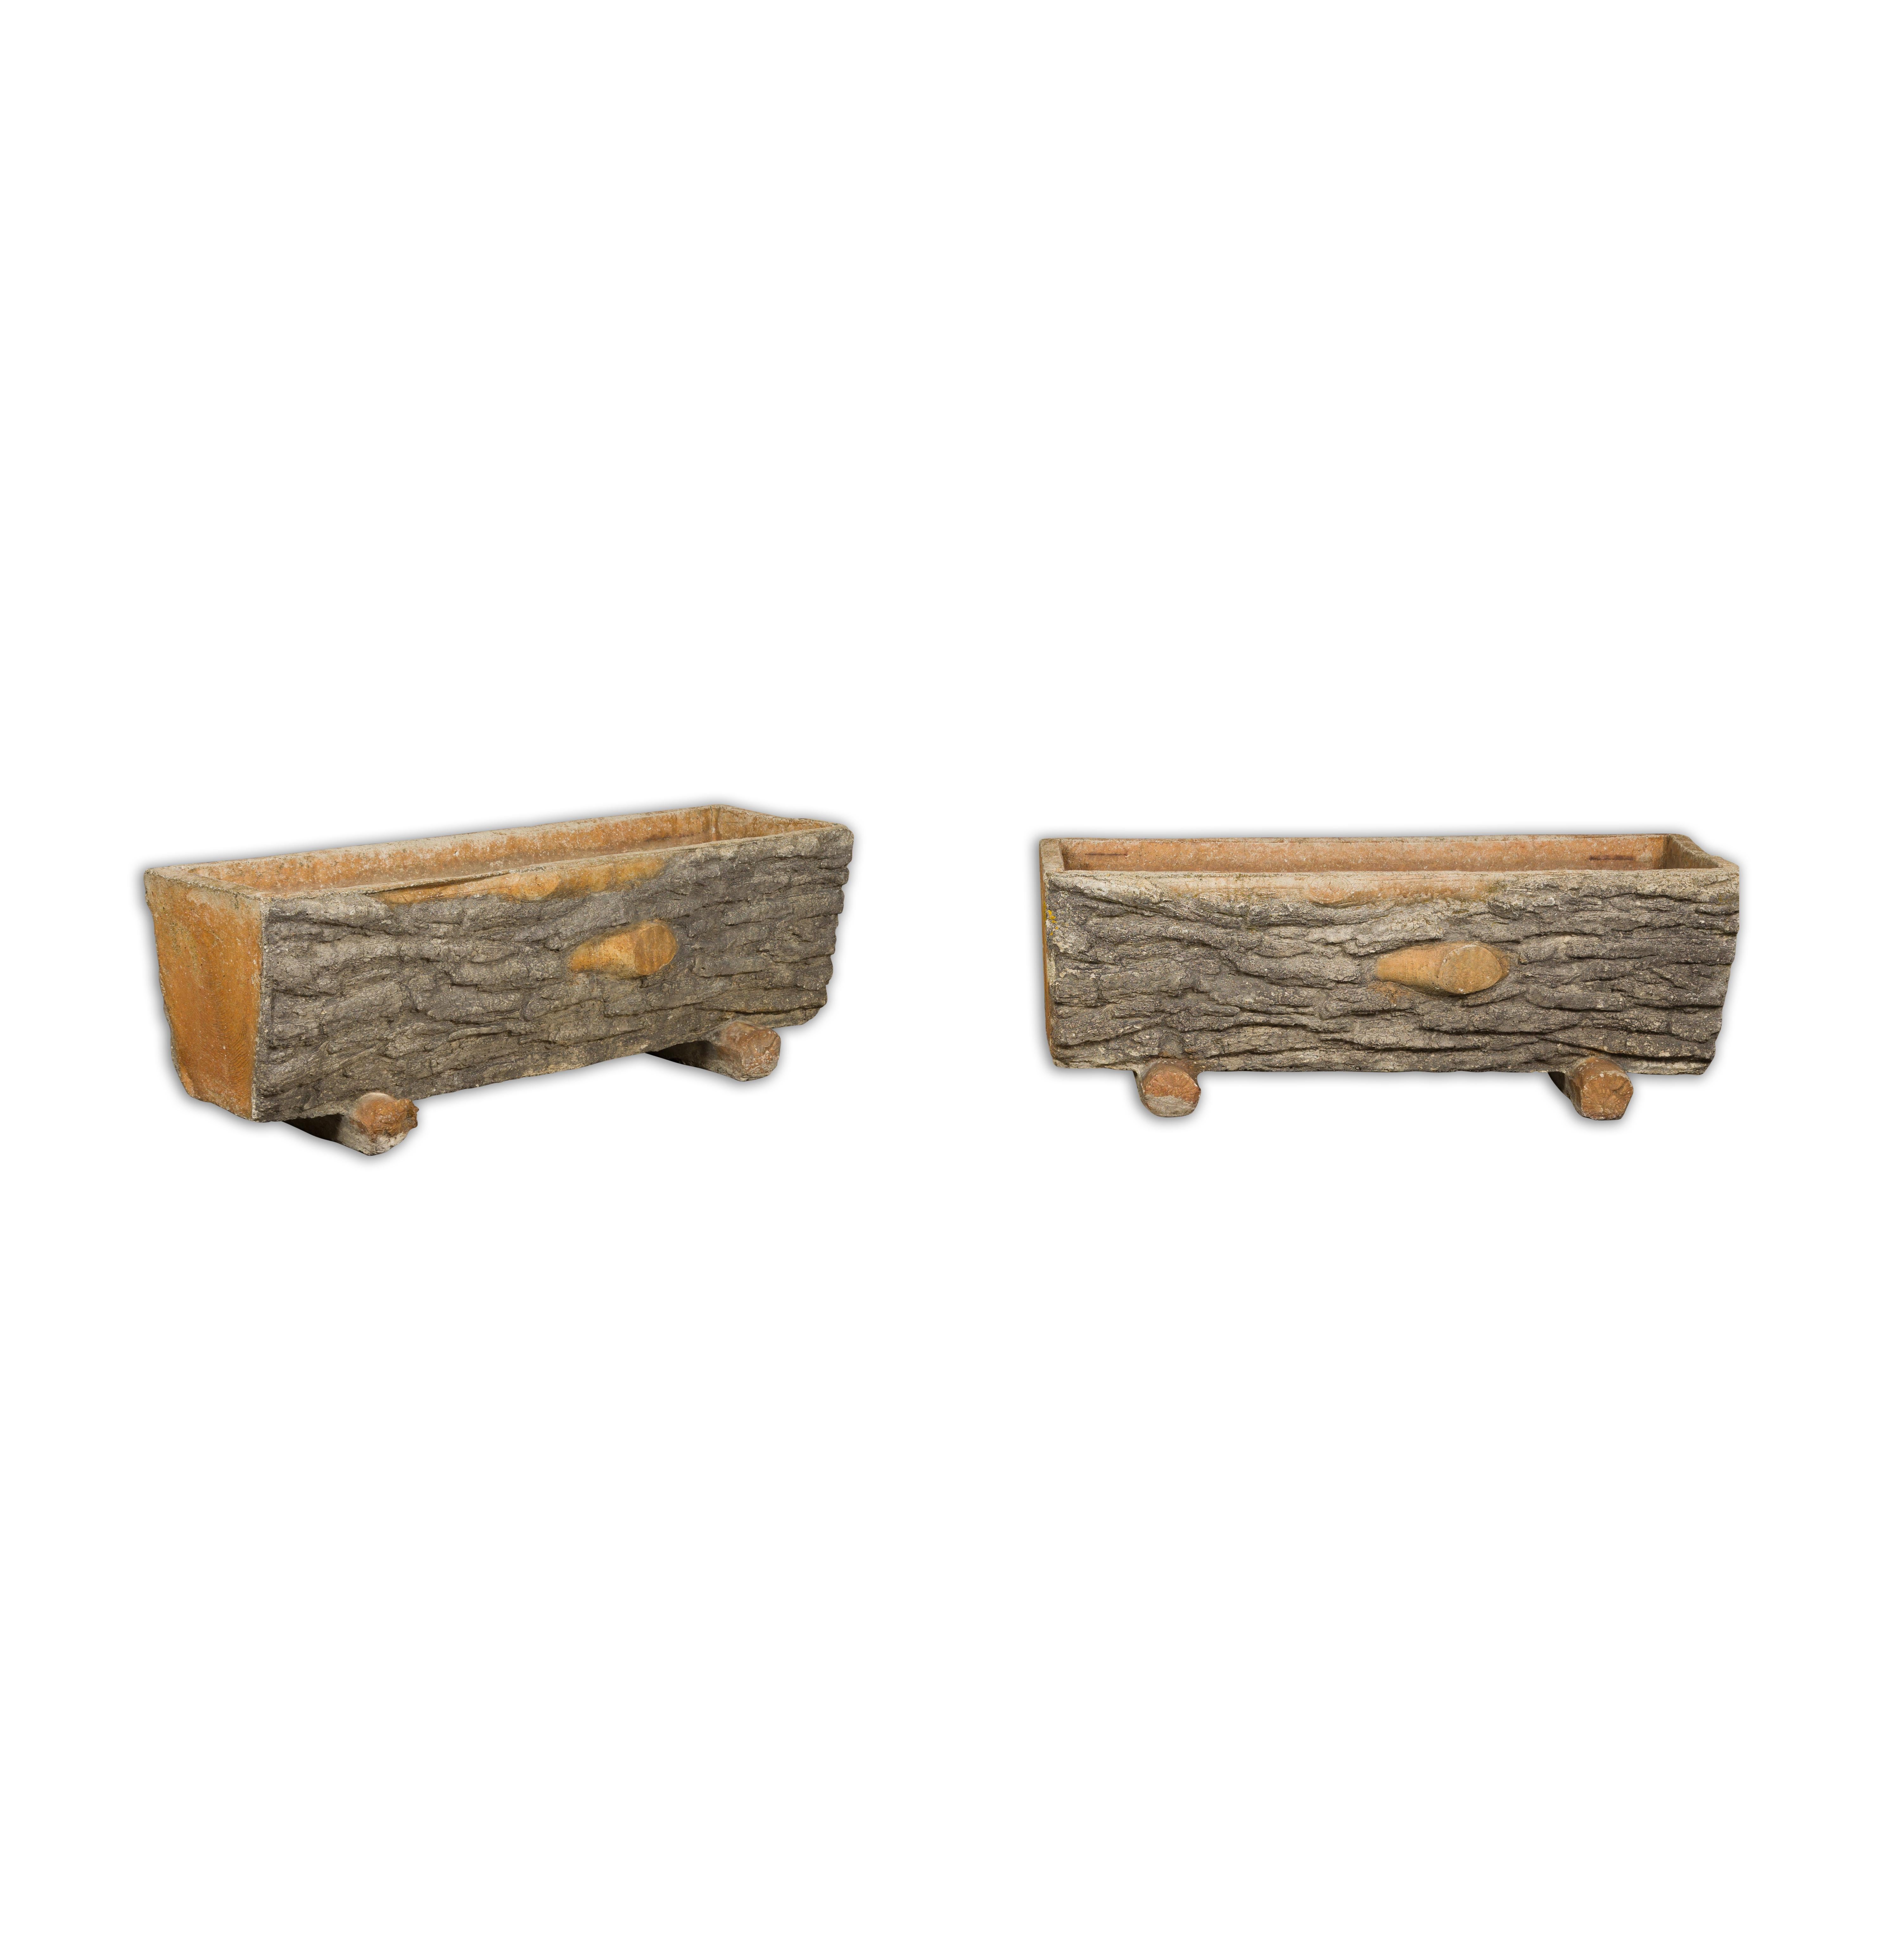 A pair of faux-bois trough shaped planters from the Midcentury period, made of concrete and accented with grey and orange tones. Breathe an air of rustic charm into your garden with this pair of Midcentury faux-bois trough-shaped planters. Each